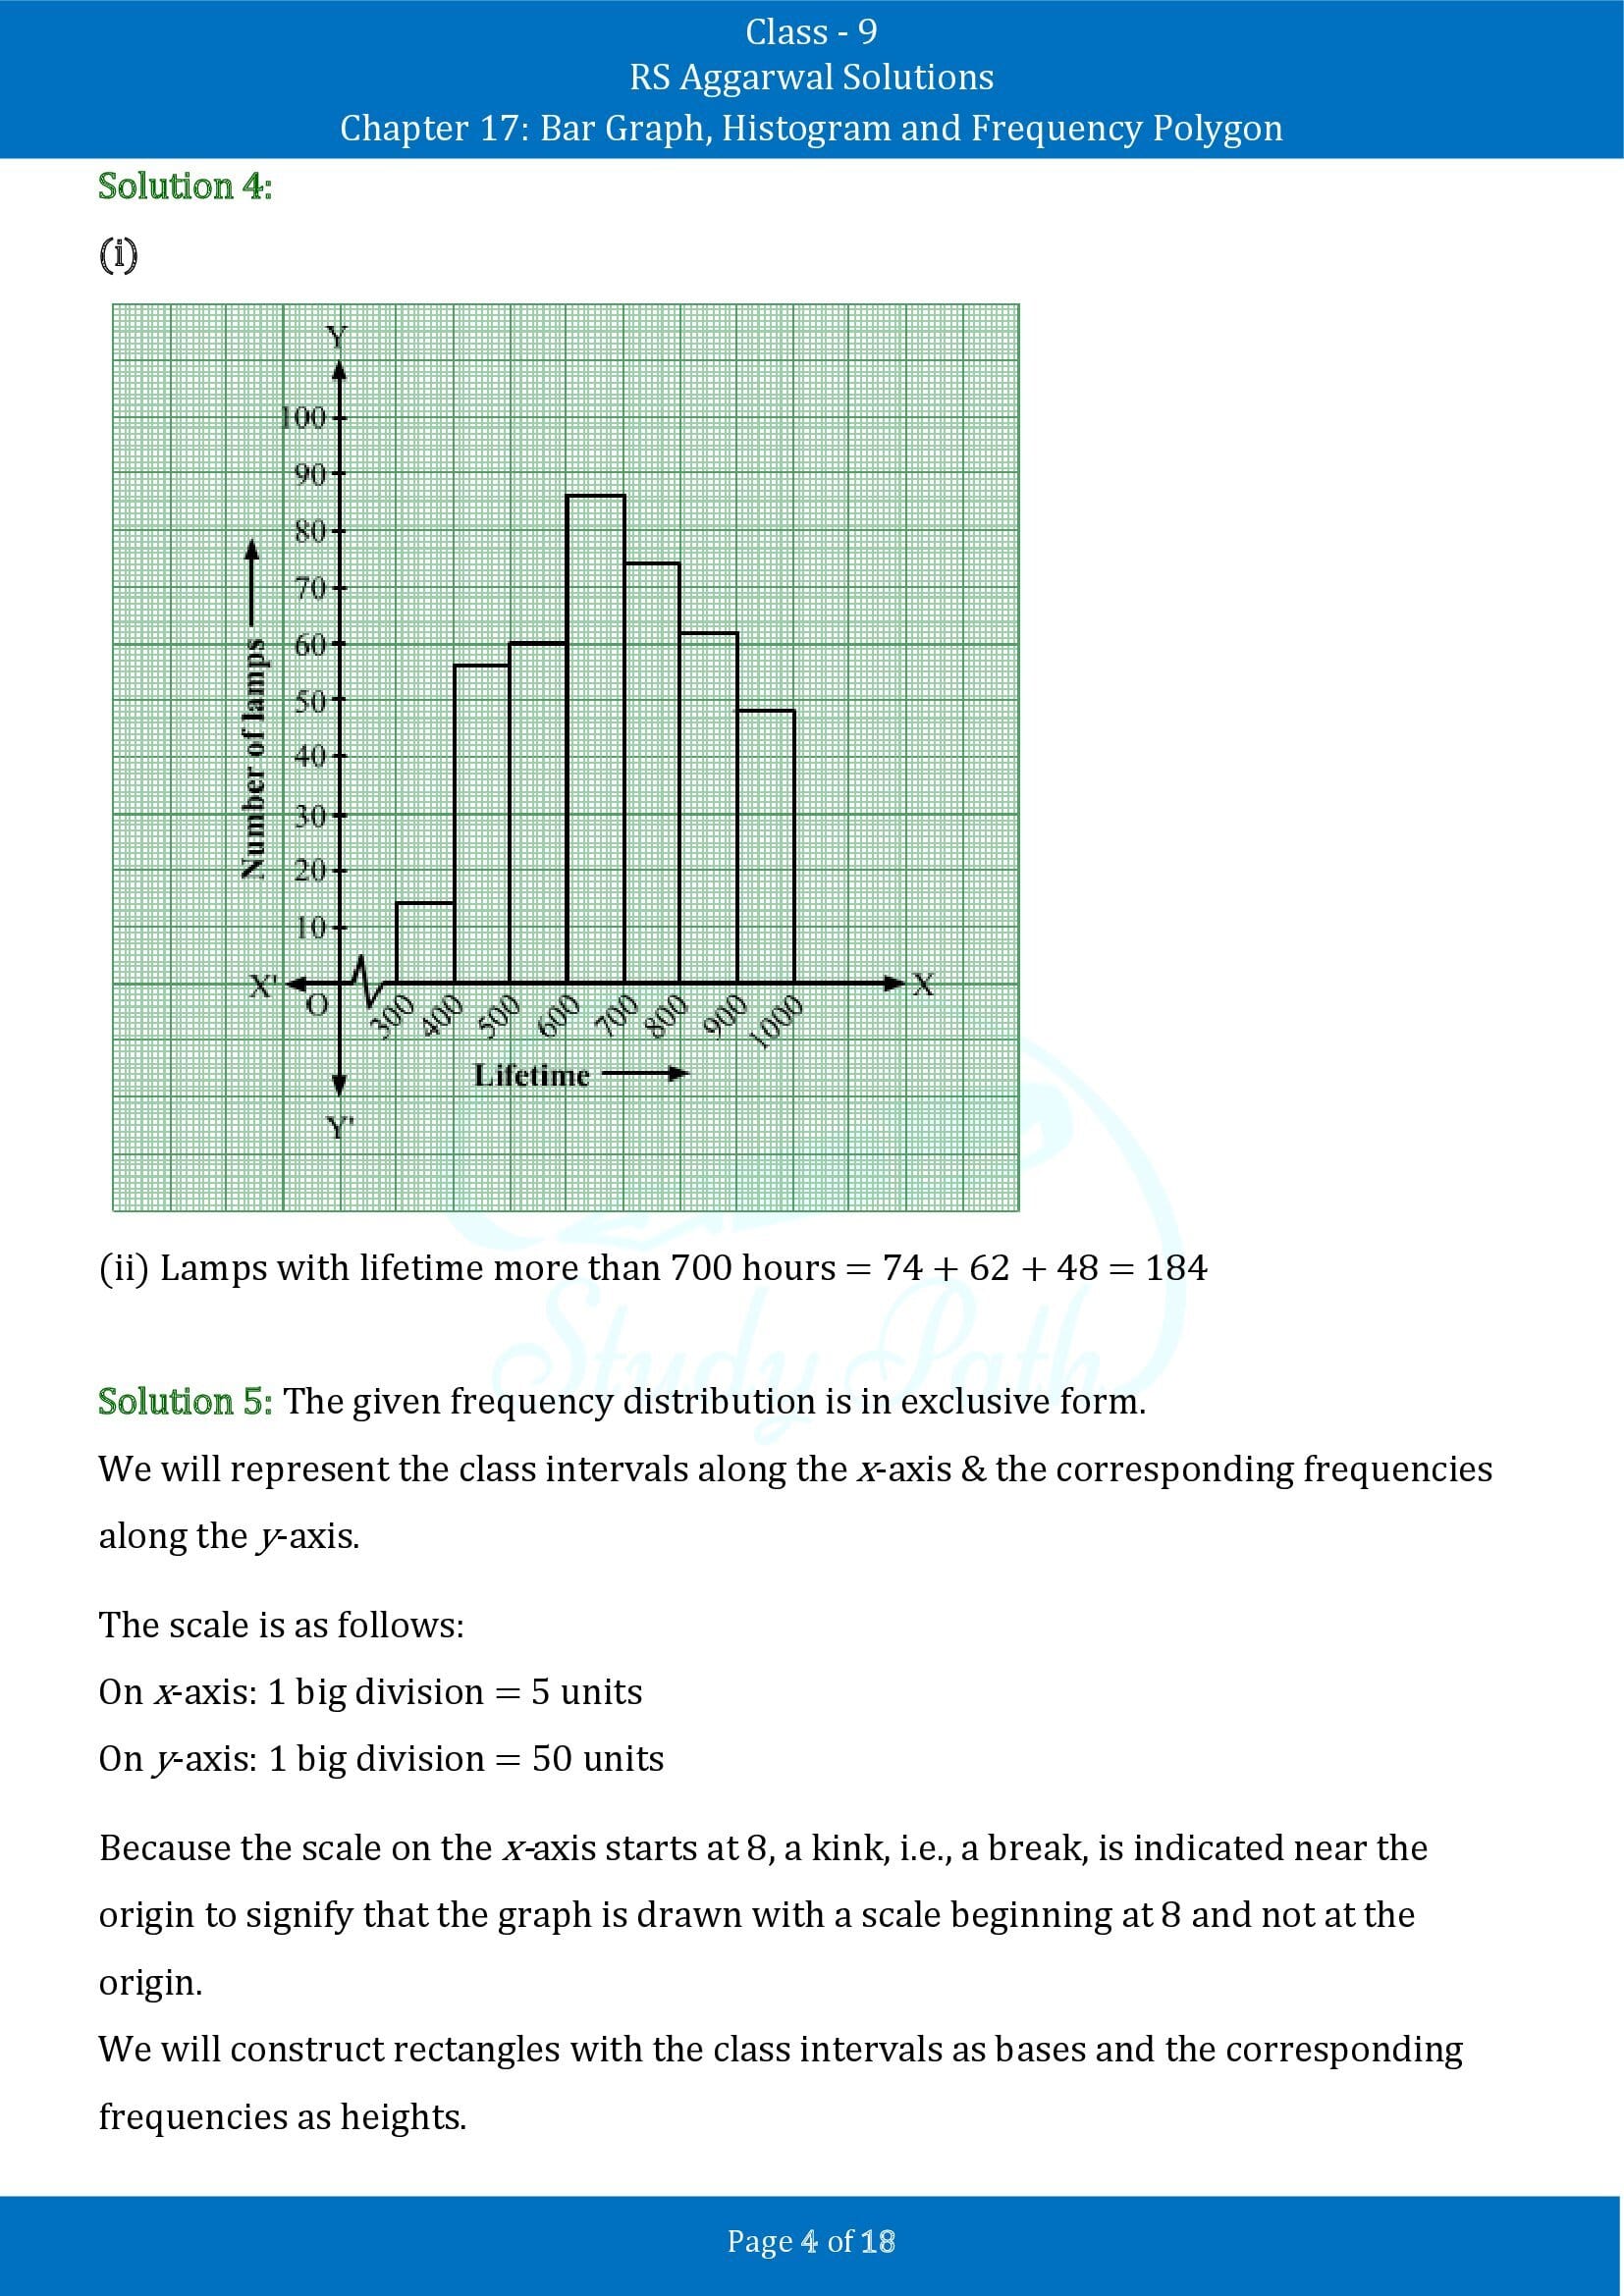 RS Aggarwal Solutions Class 9 Chapter 17 Bar Graph Histogram and Frequency Polygon Exercise 17B 00004